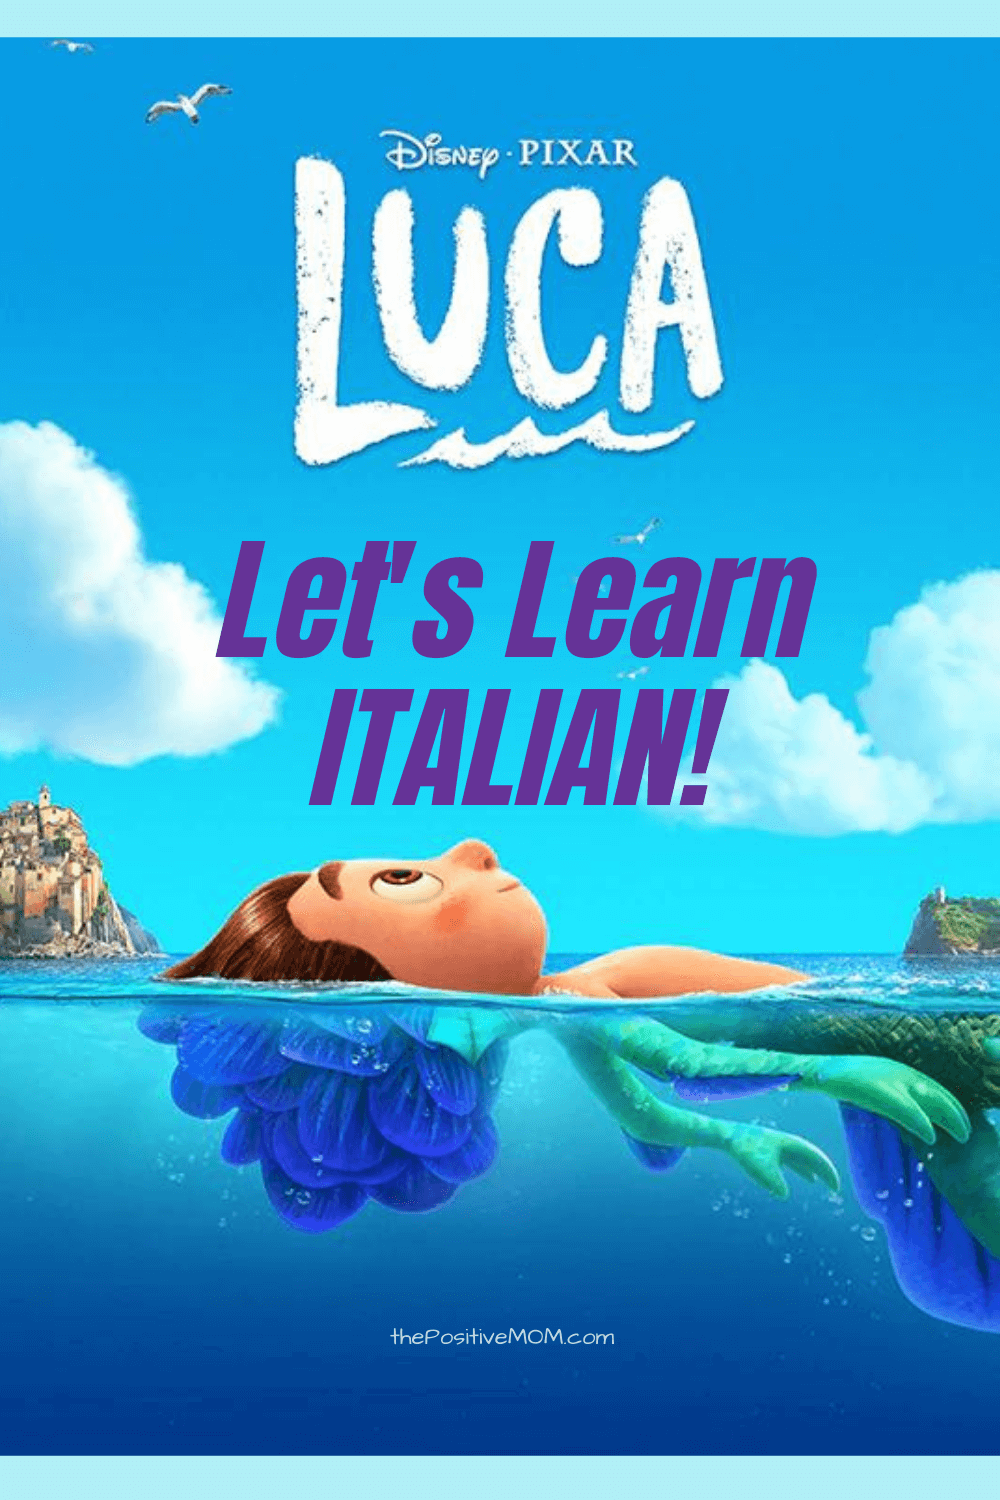 Italian Phrases from LUCA: Italian Quotes Featured In The Movie